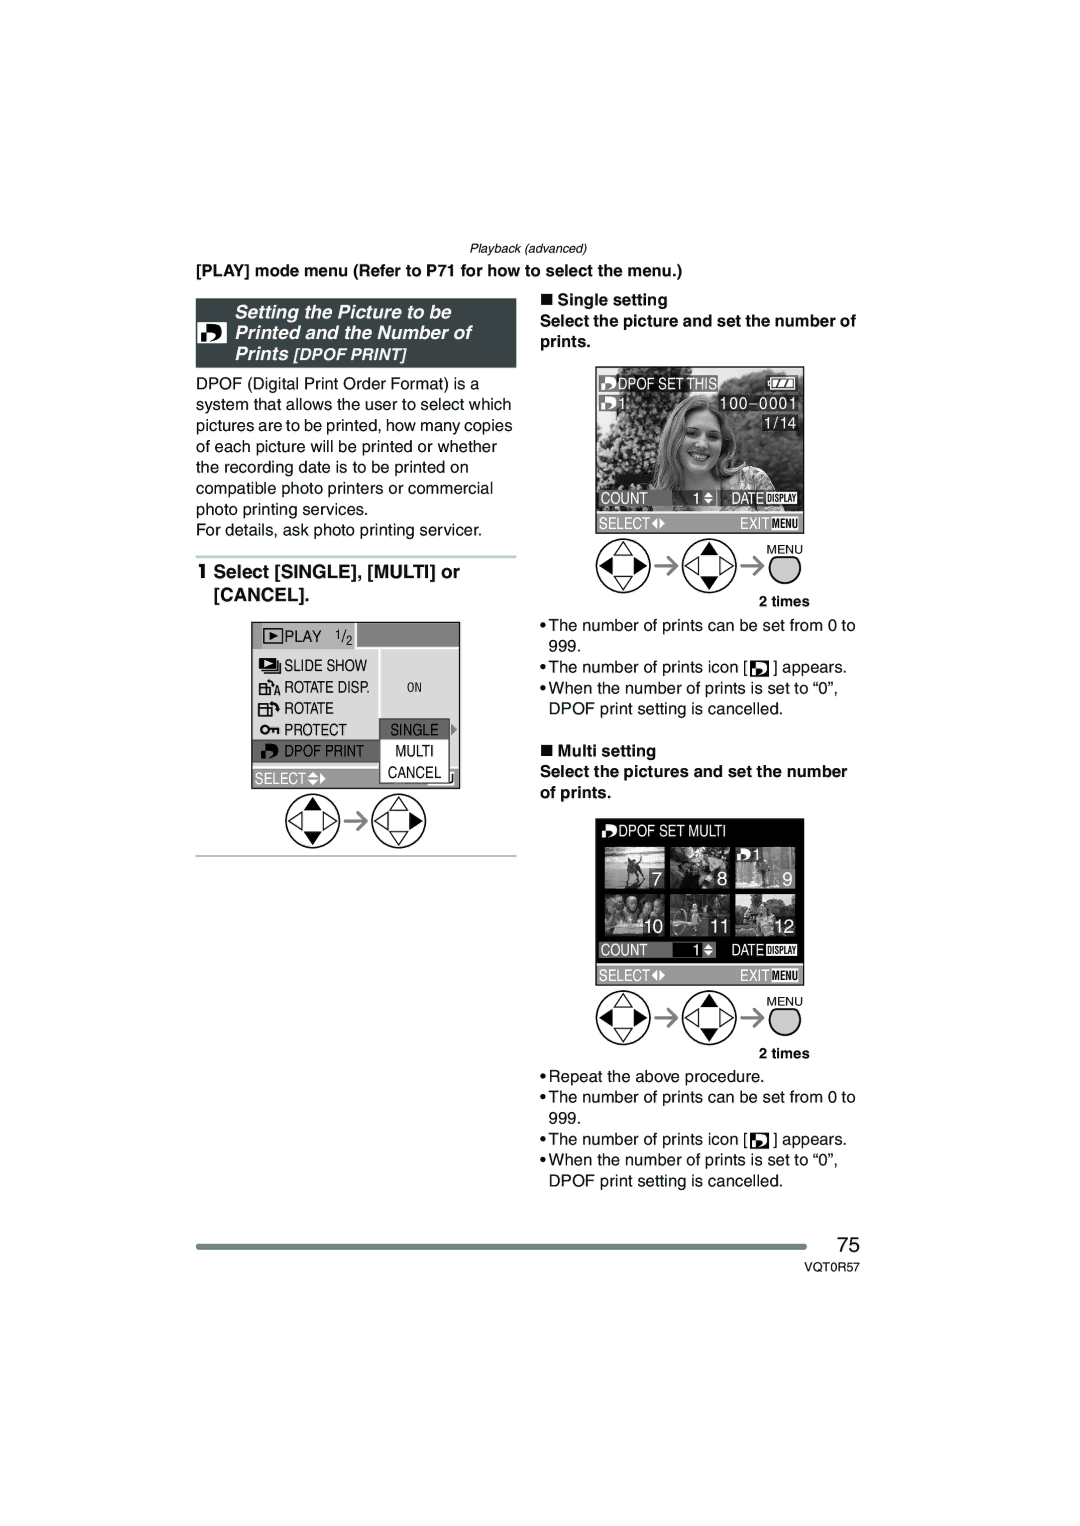 Panasonic DMC-FX8GN operating instructions Setting the Picture to be Printed and the Number, Select SINGLE, Multi or 